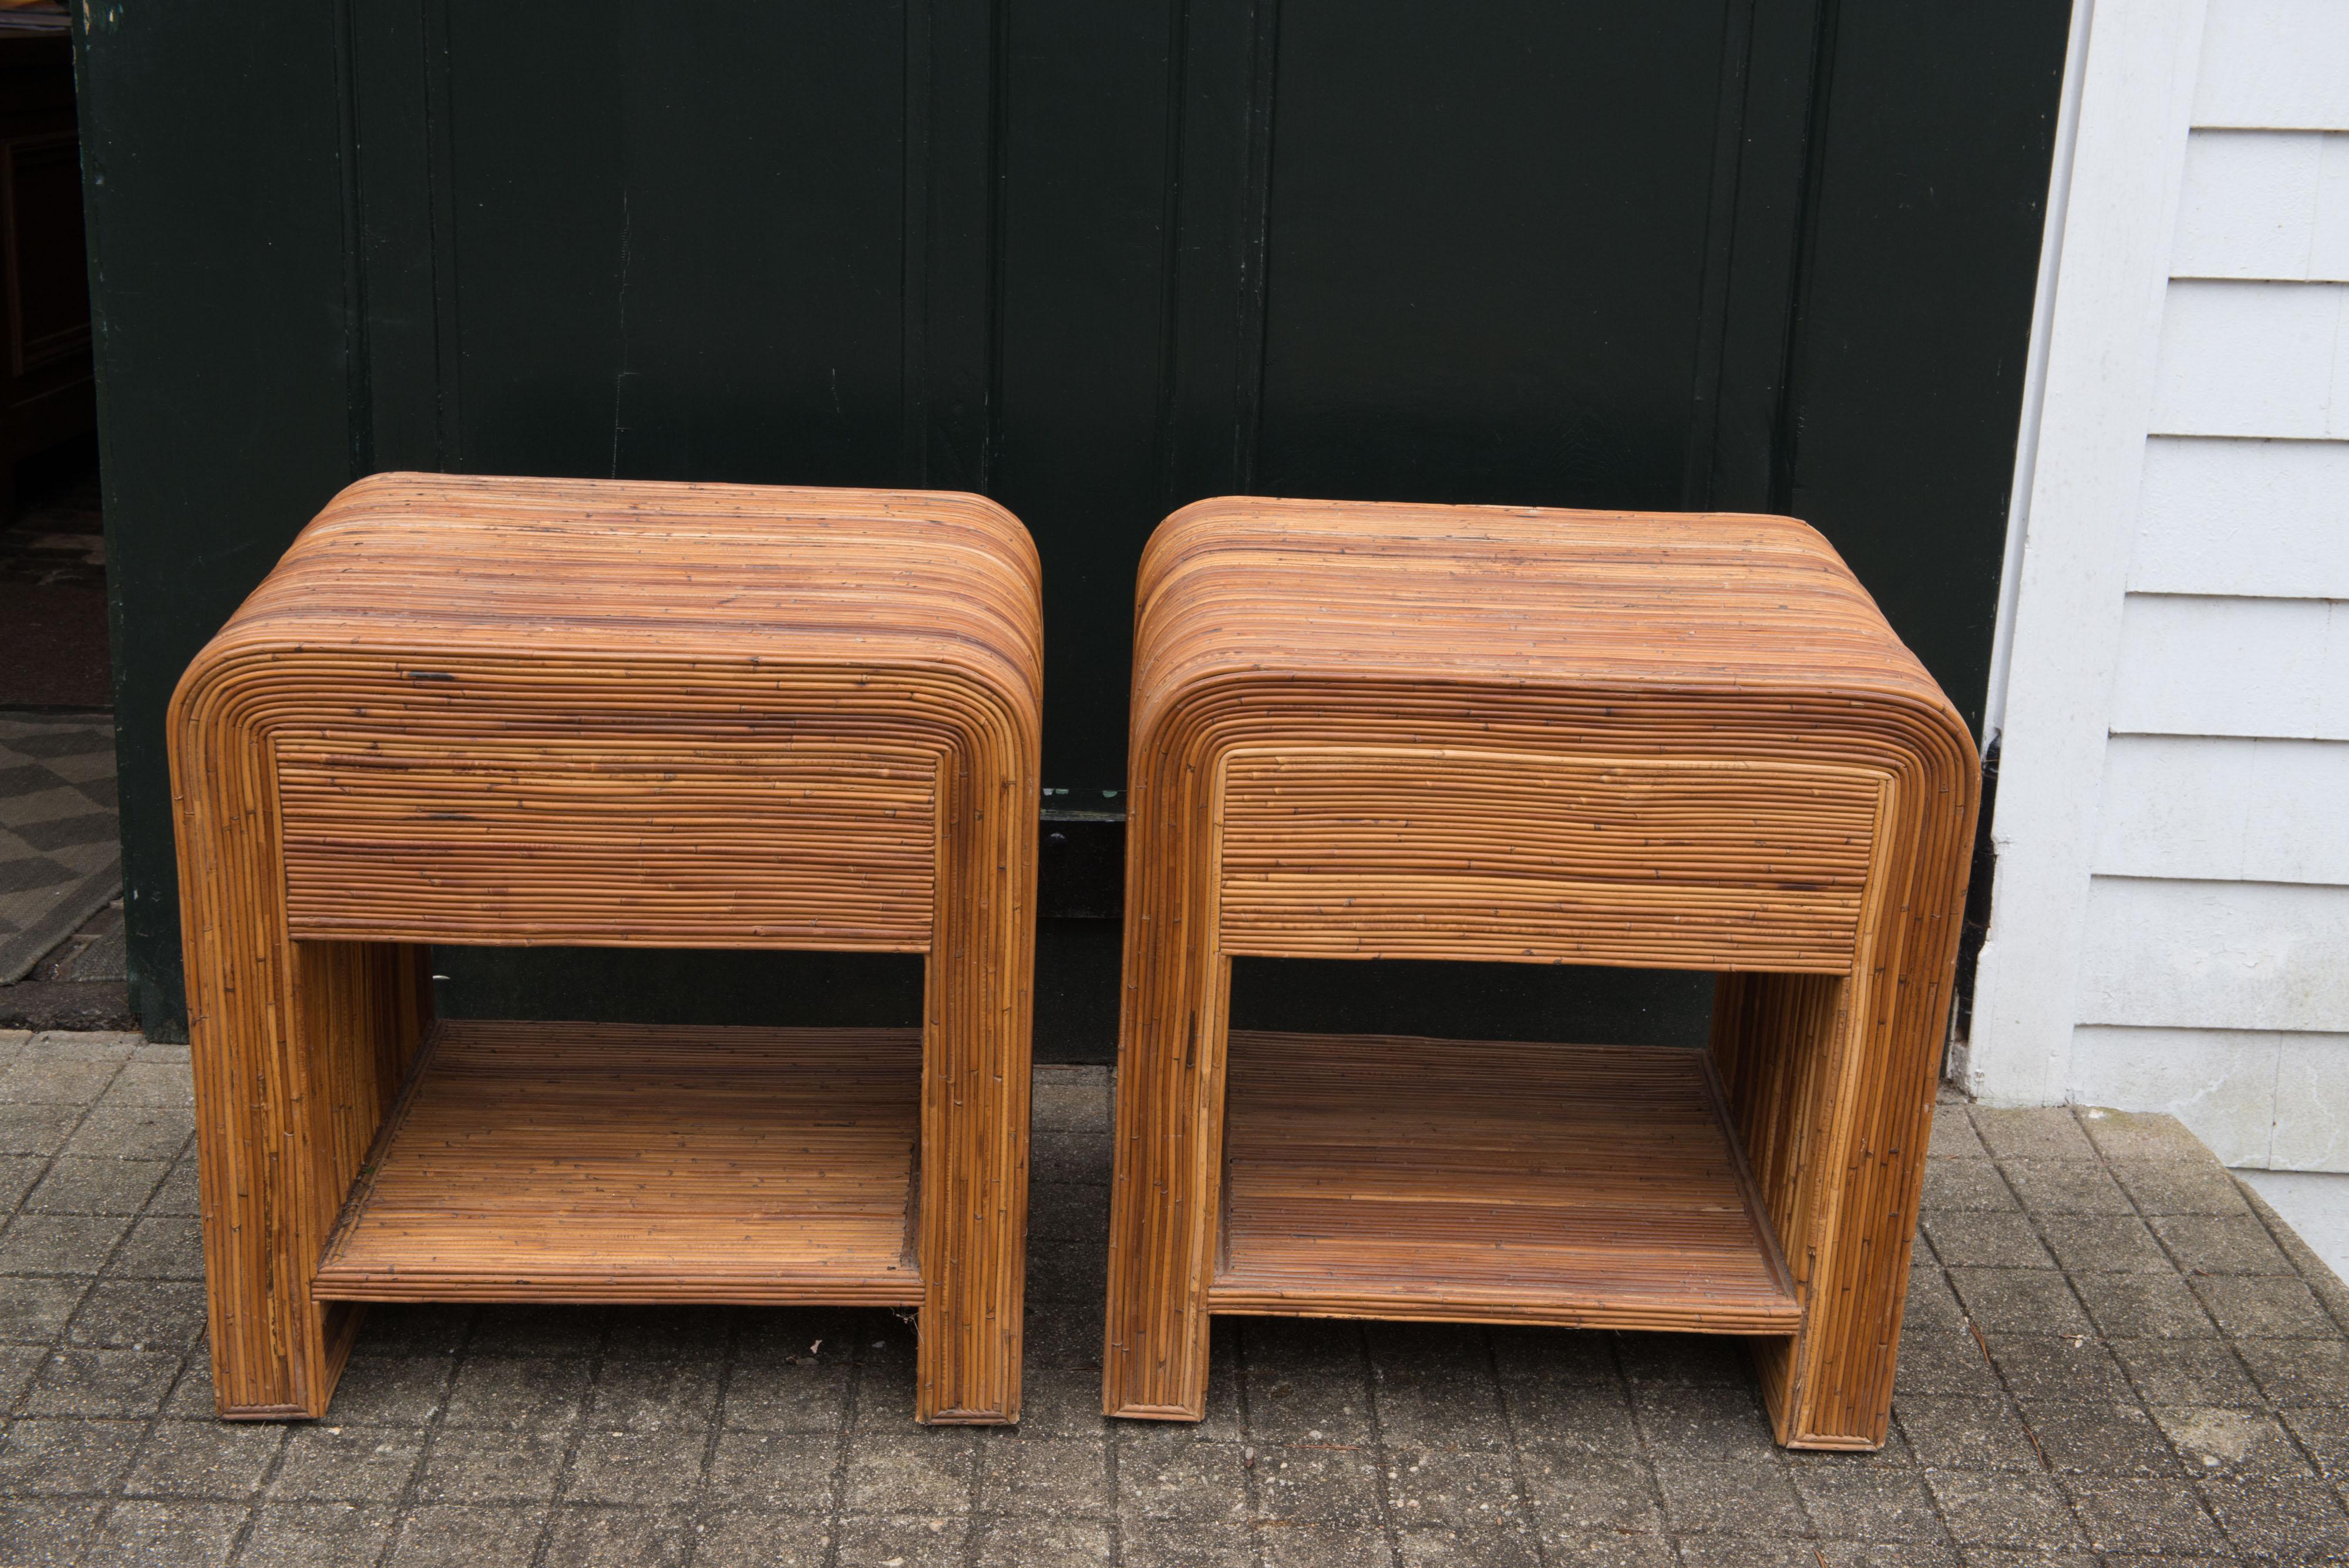 Rattan Side Tables with Drawer 9